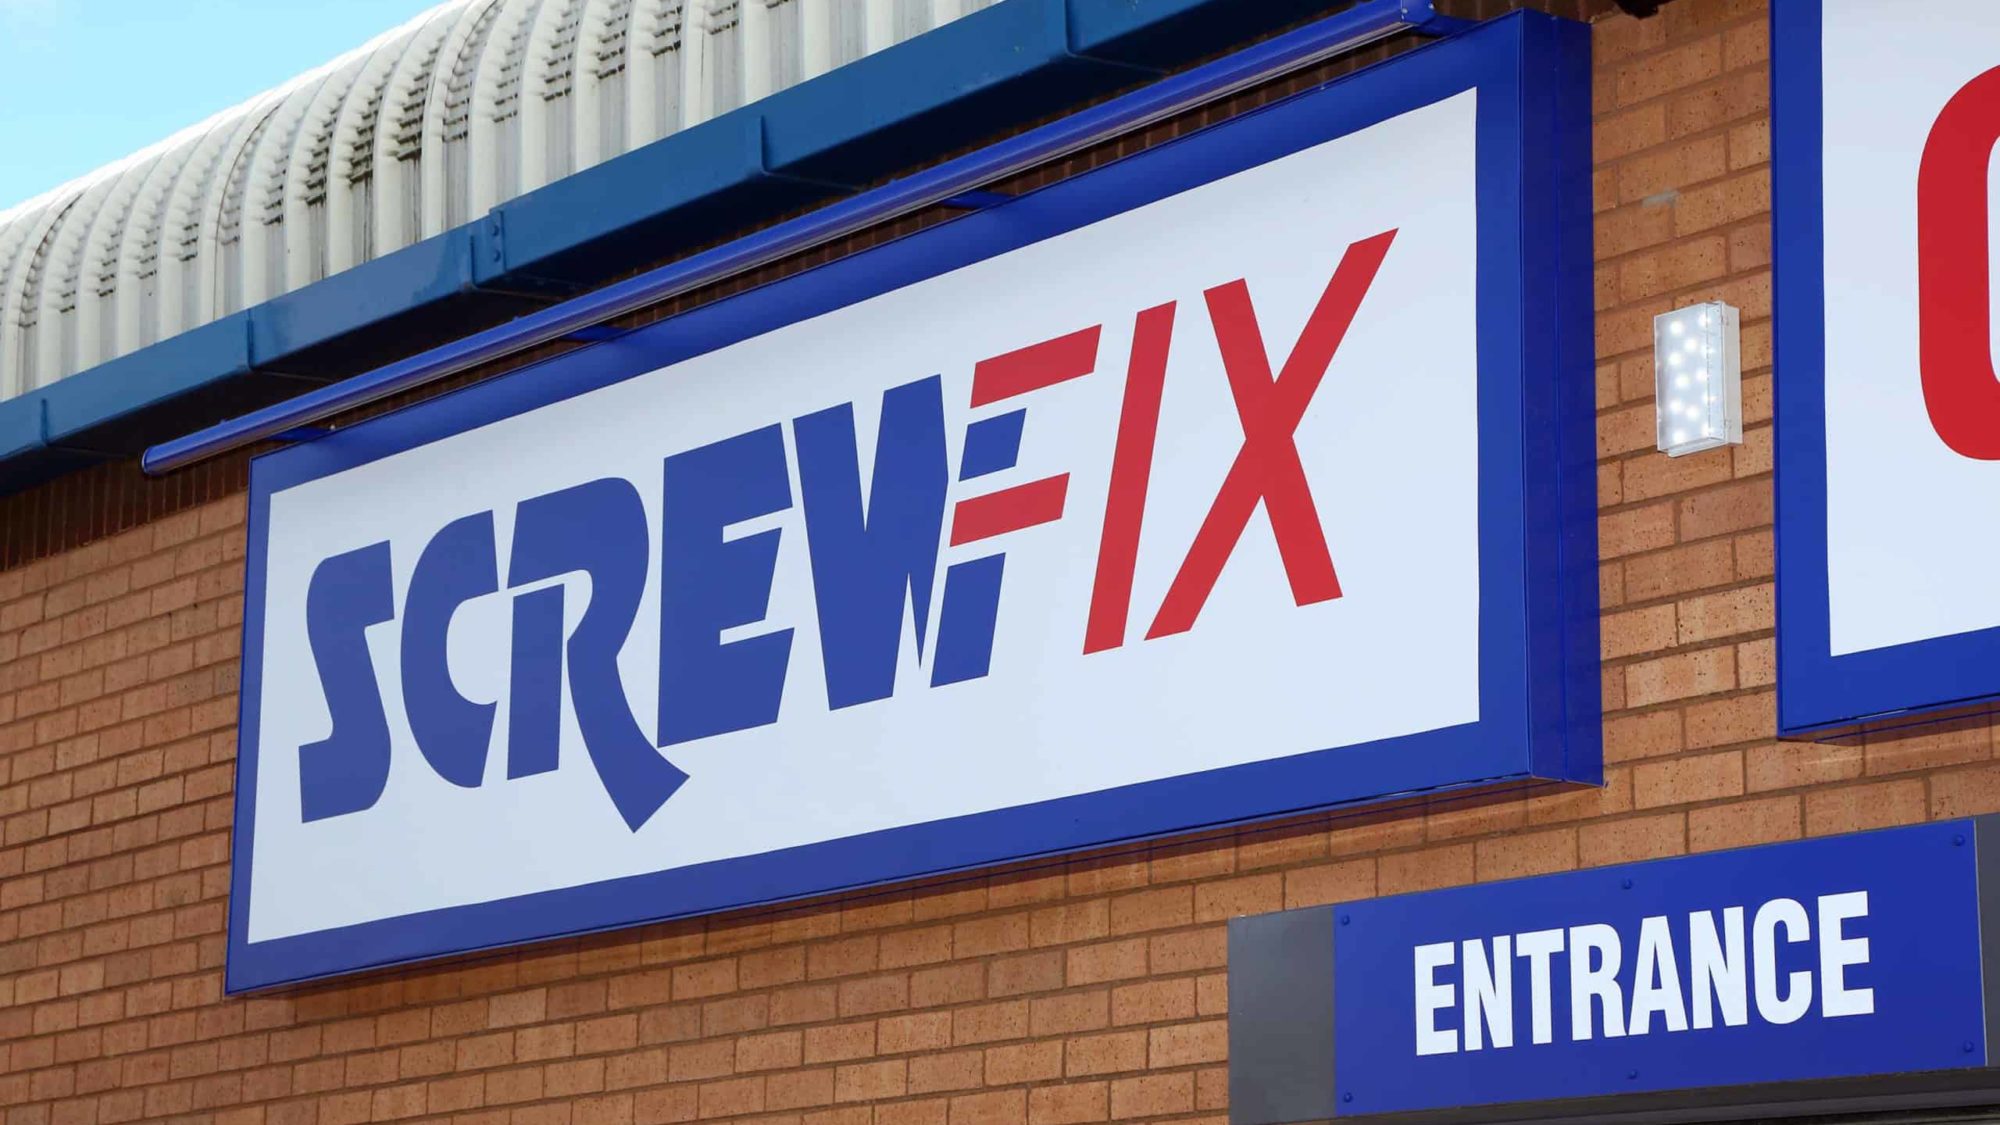 Screwfix to open 40 new stores